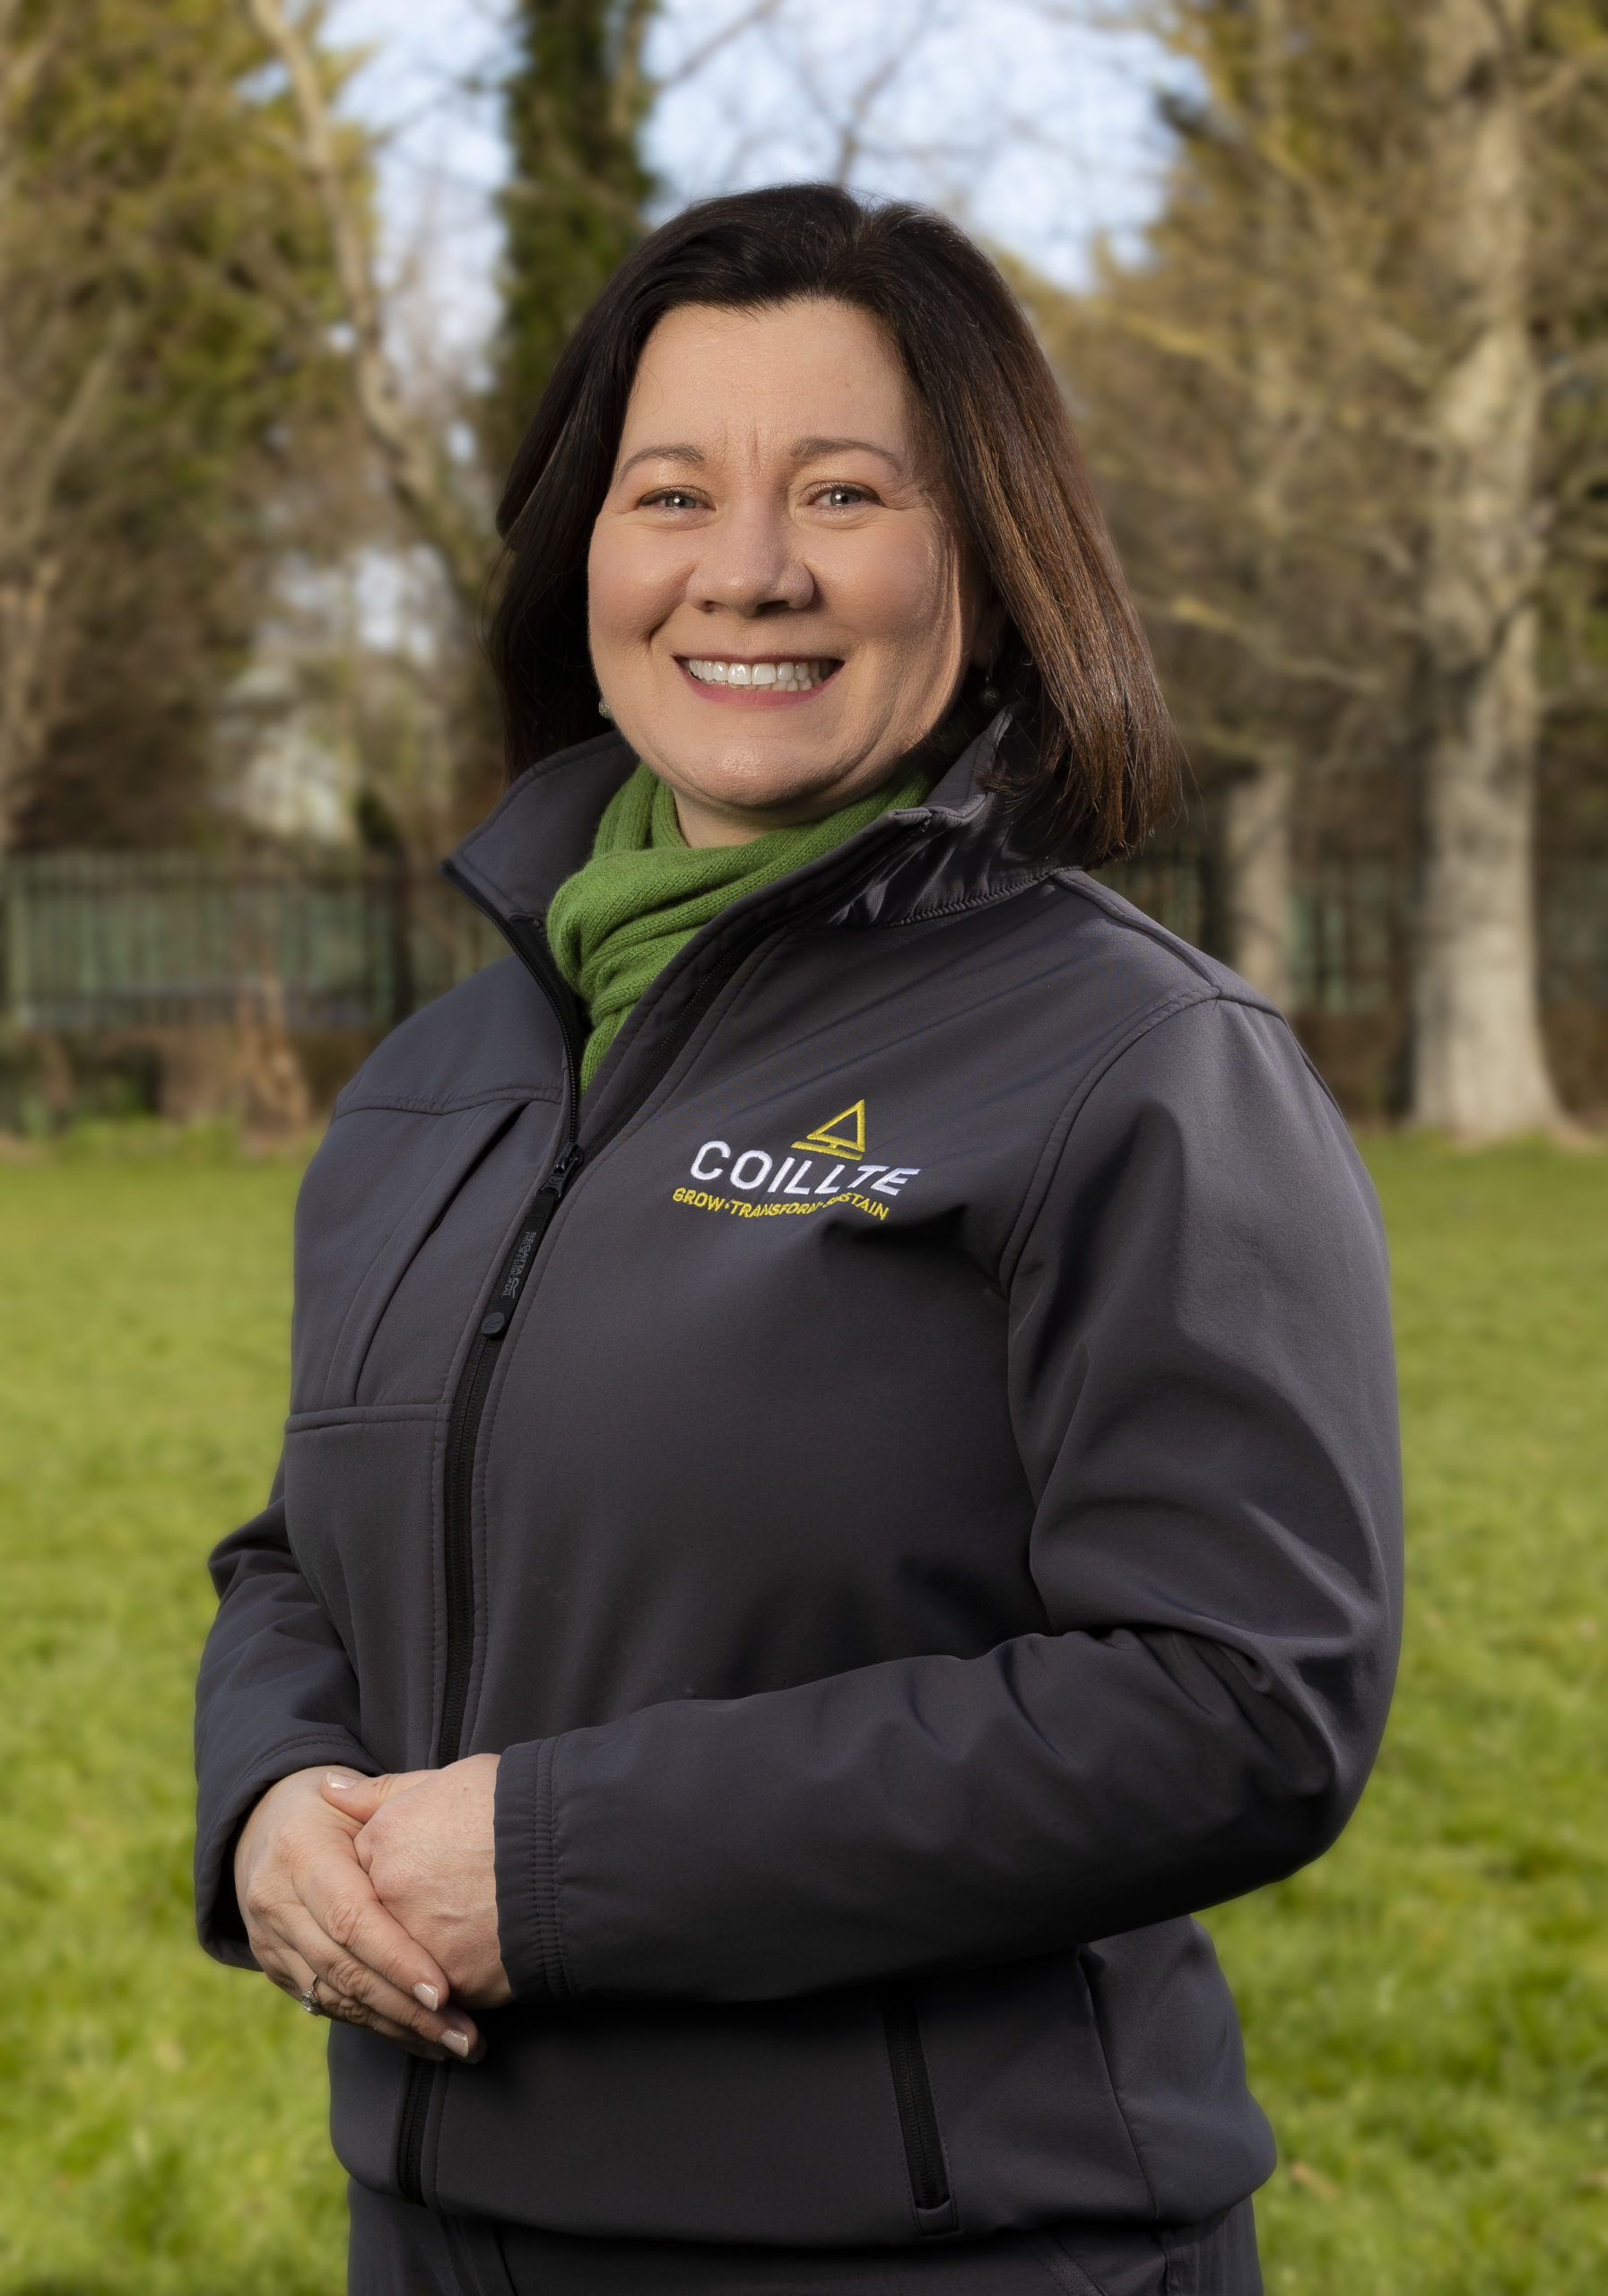 Picture of Coillte's CEO Imelda Hurley